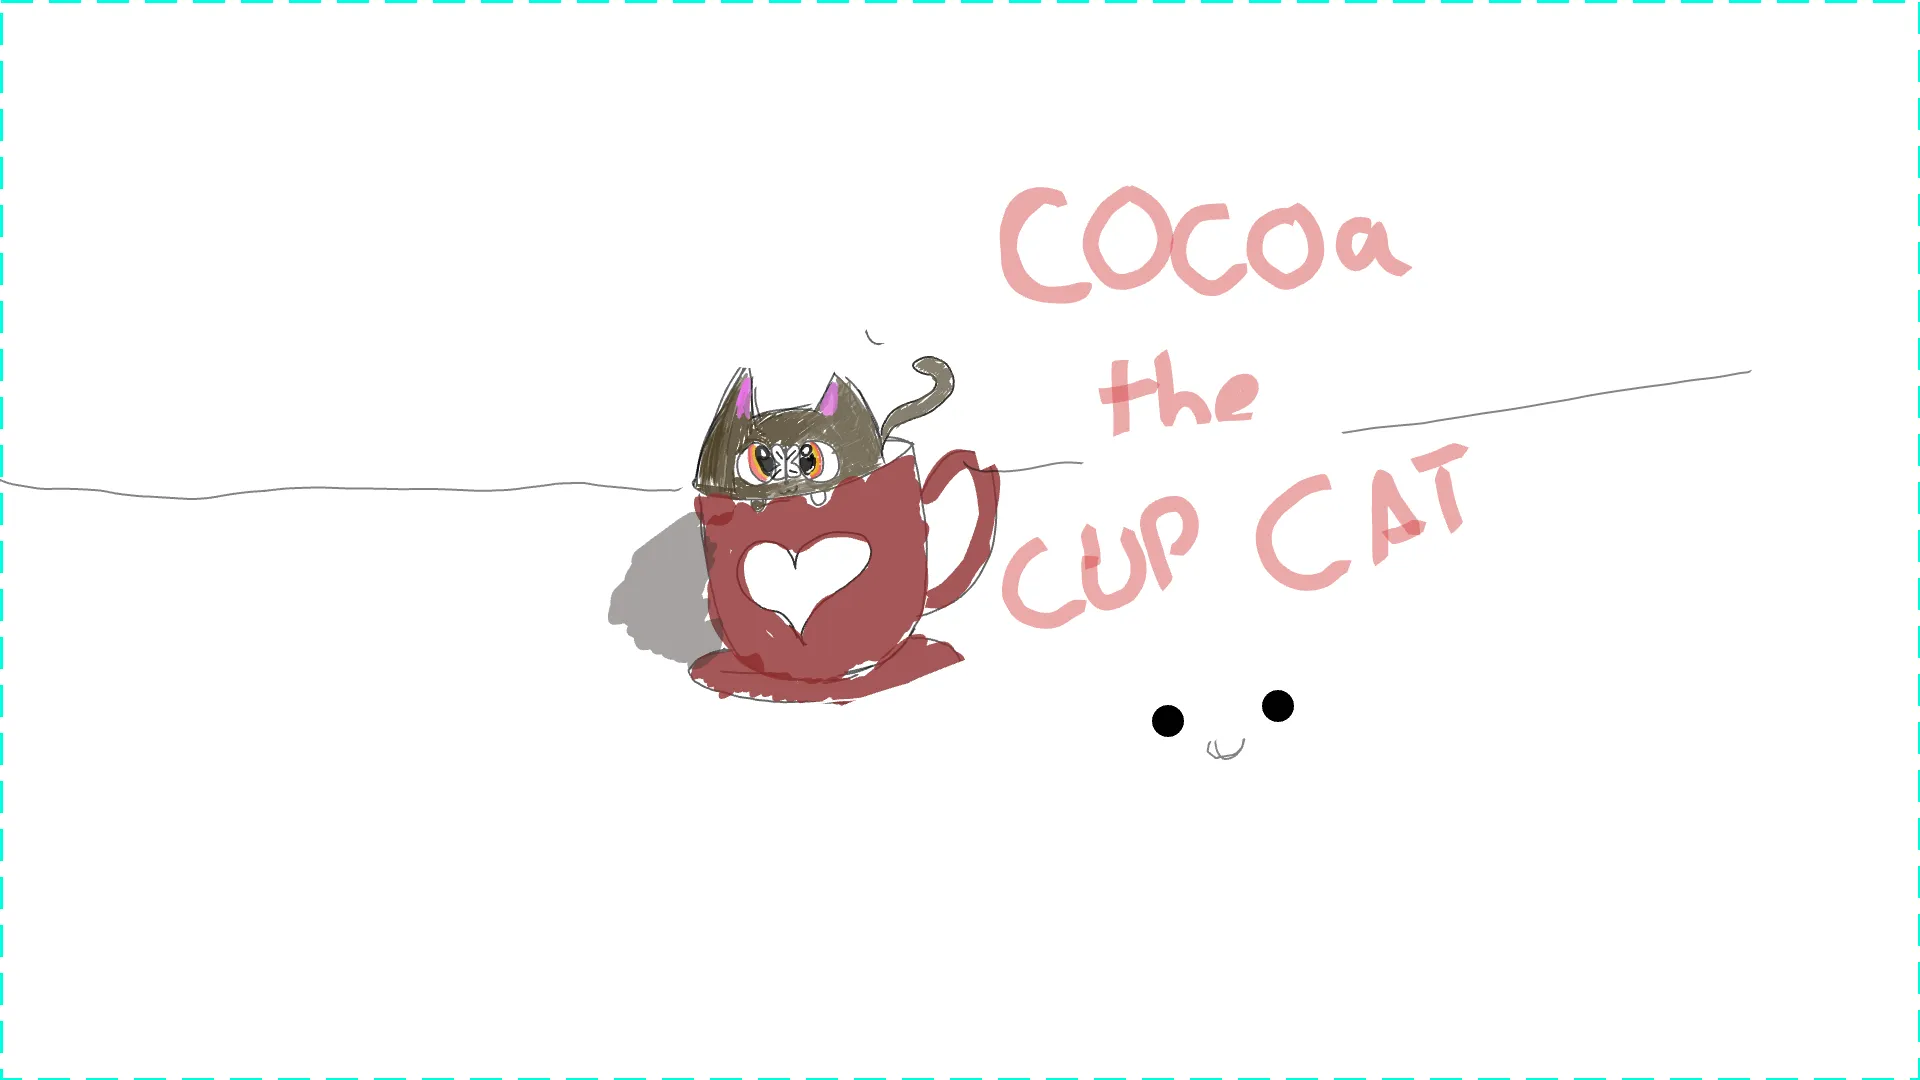 Cocoa the cup cat